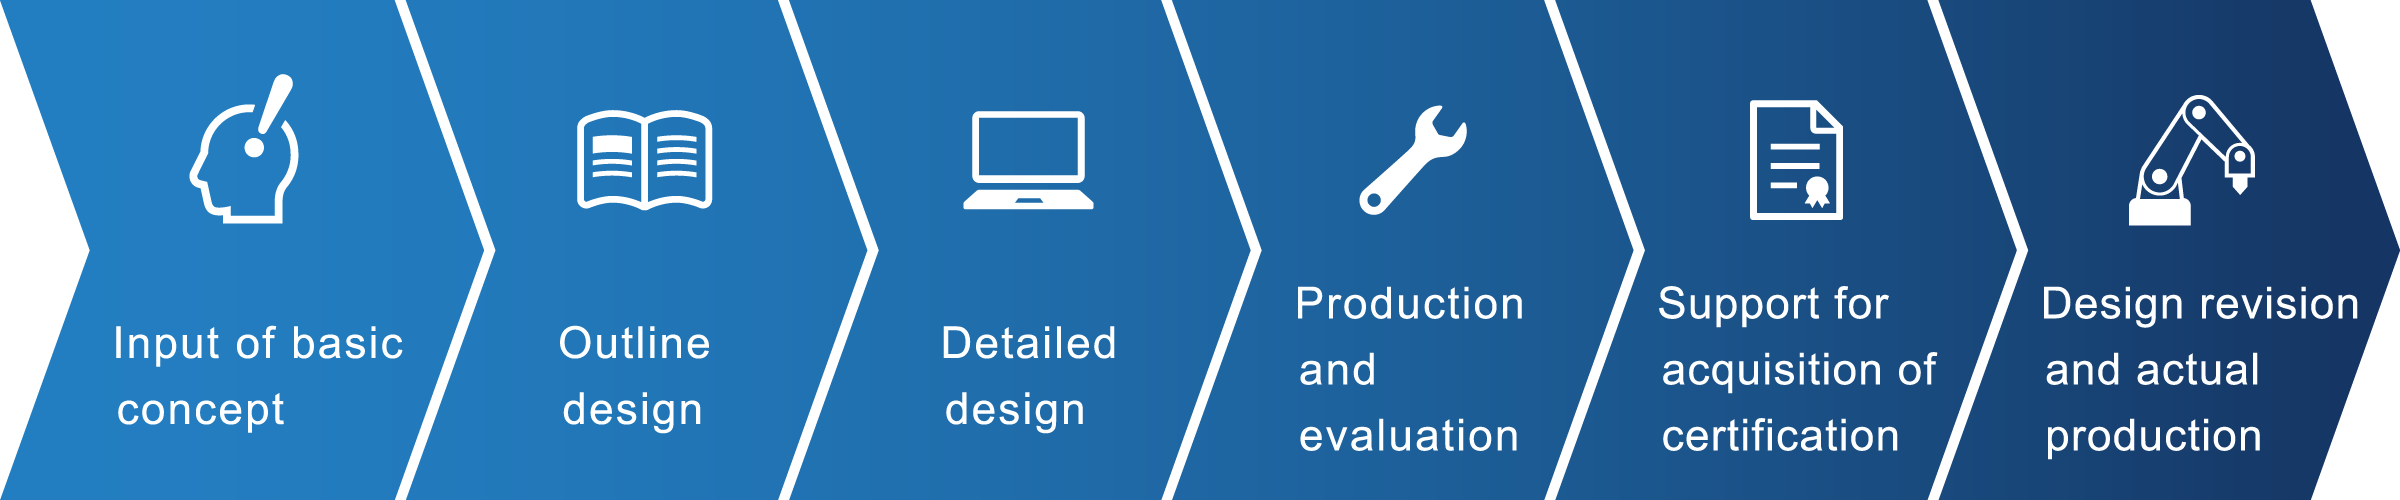 Input of basic concept,Outline design,Detailed design,Production and evaluation,Support for acquisition of certification,Design revision and actual production